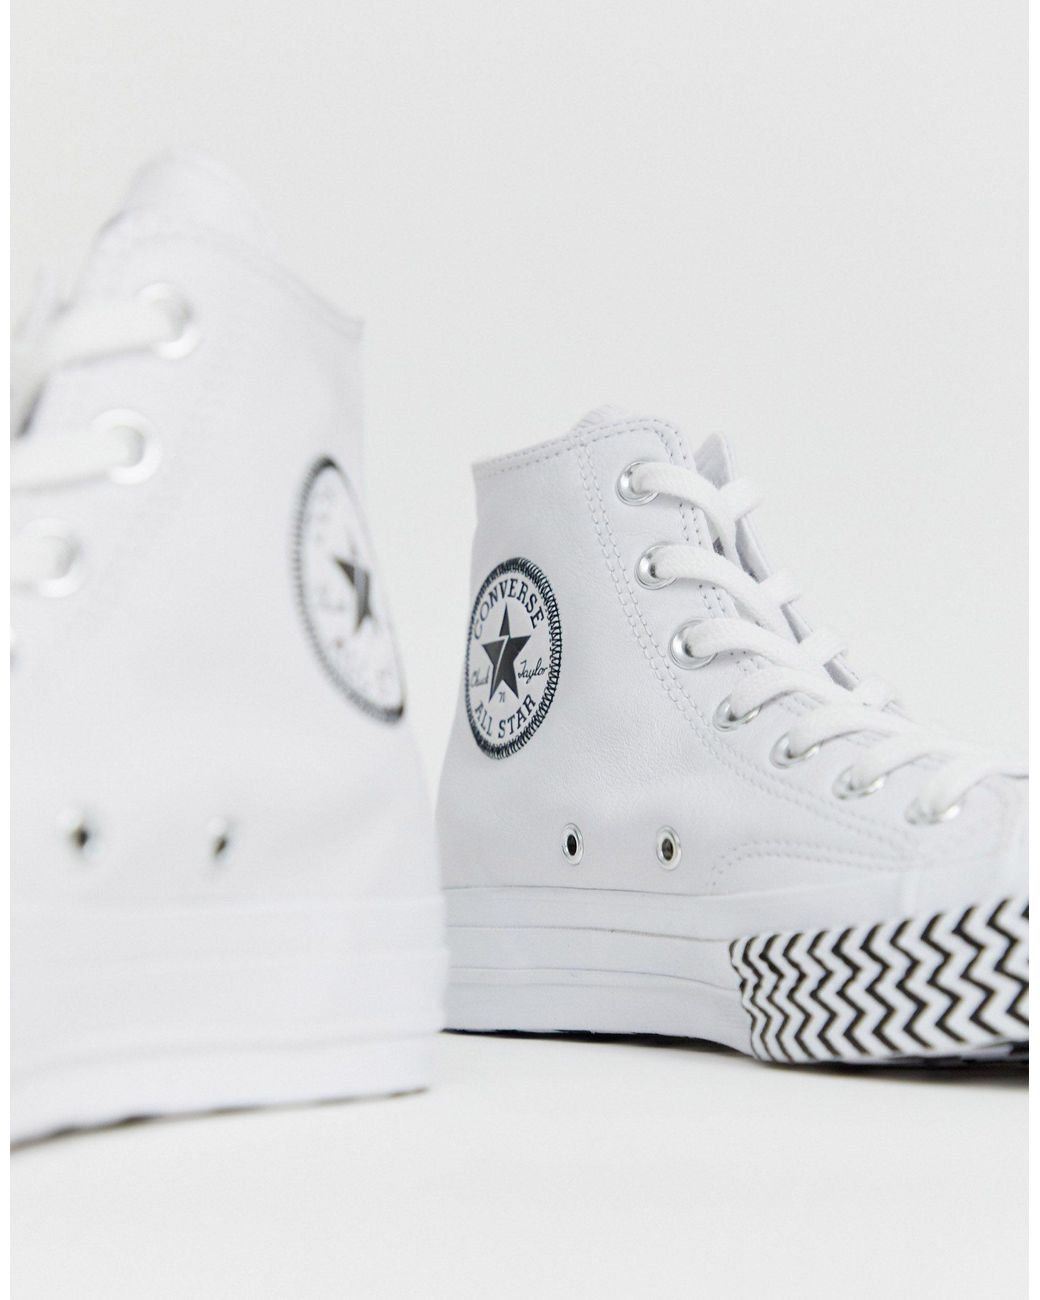 Converse White Chuck 70 Hi Leather Voltage Trainers | Lyst